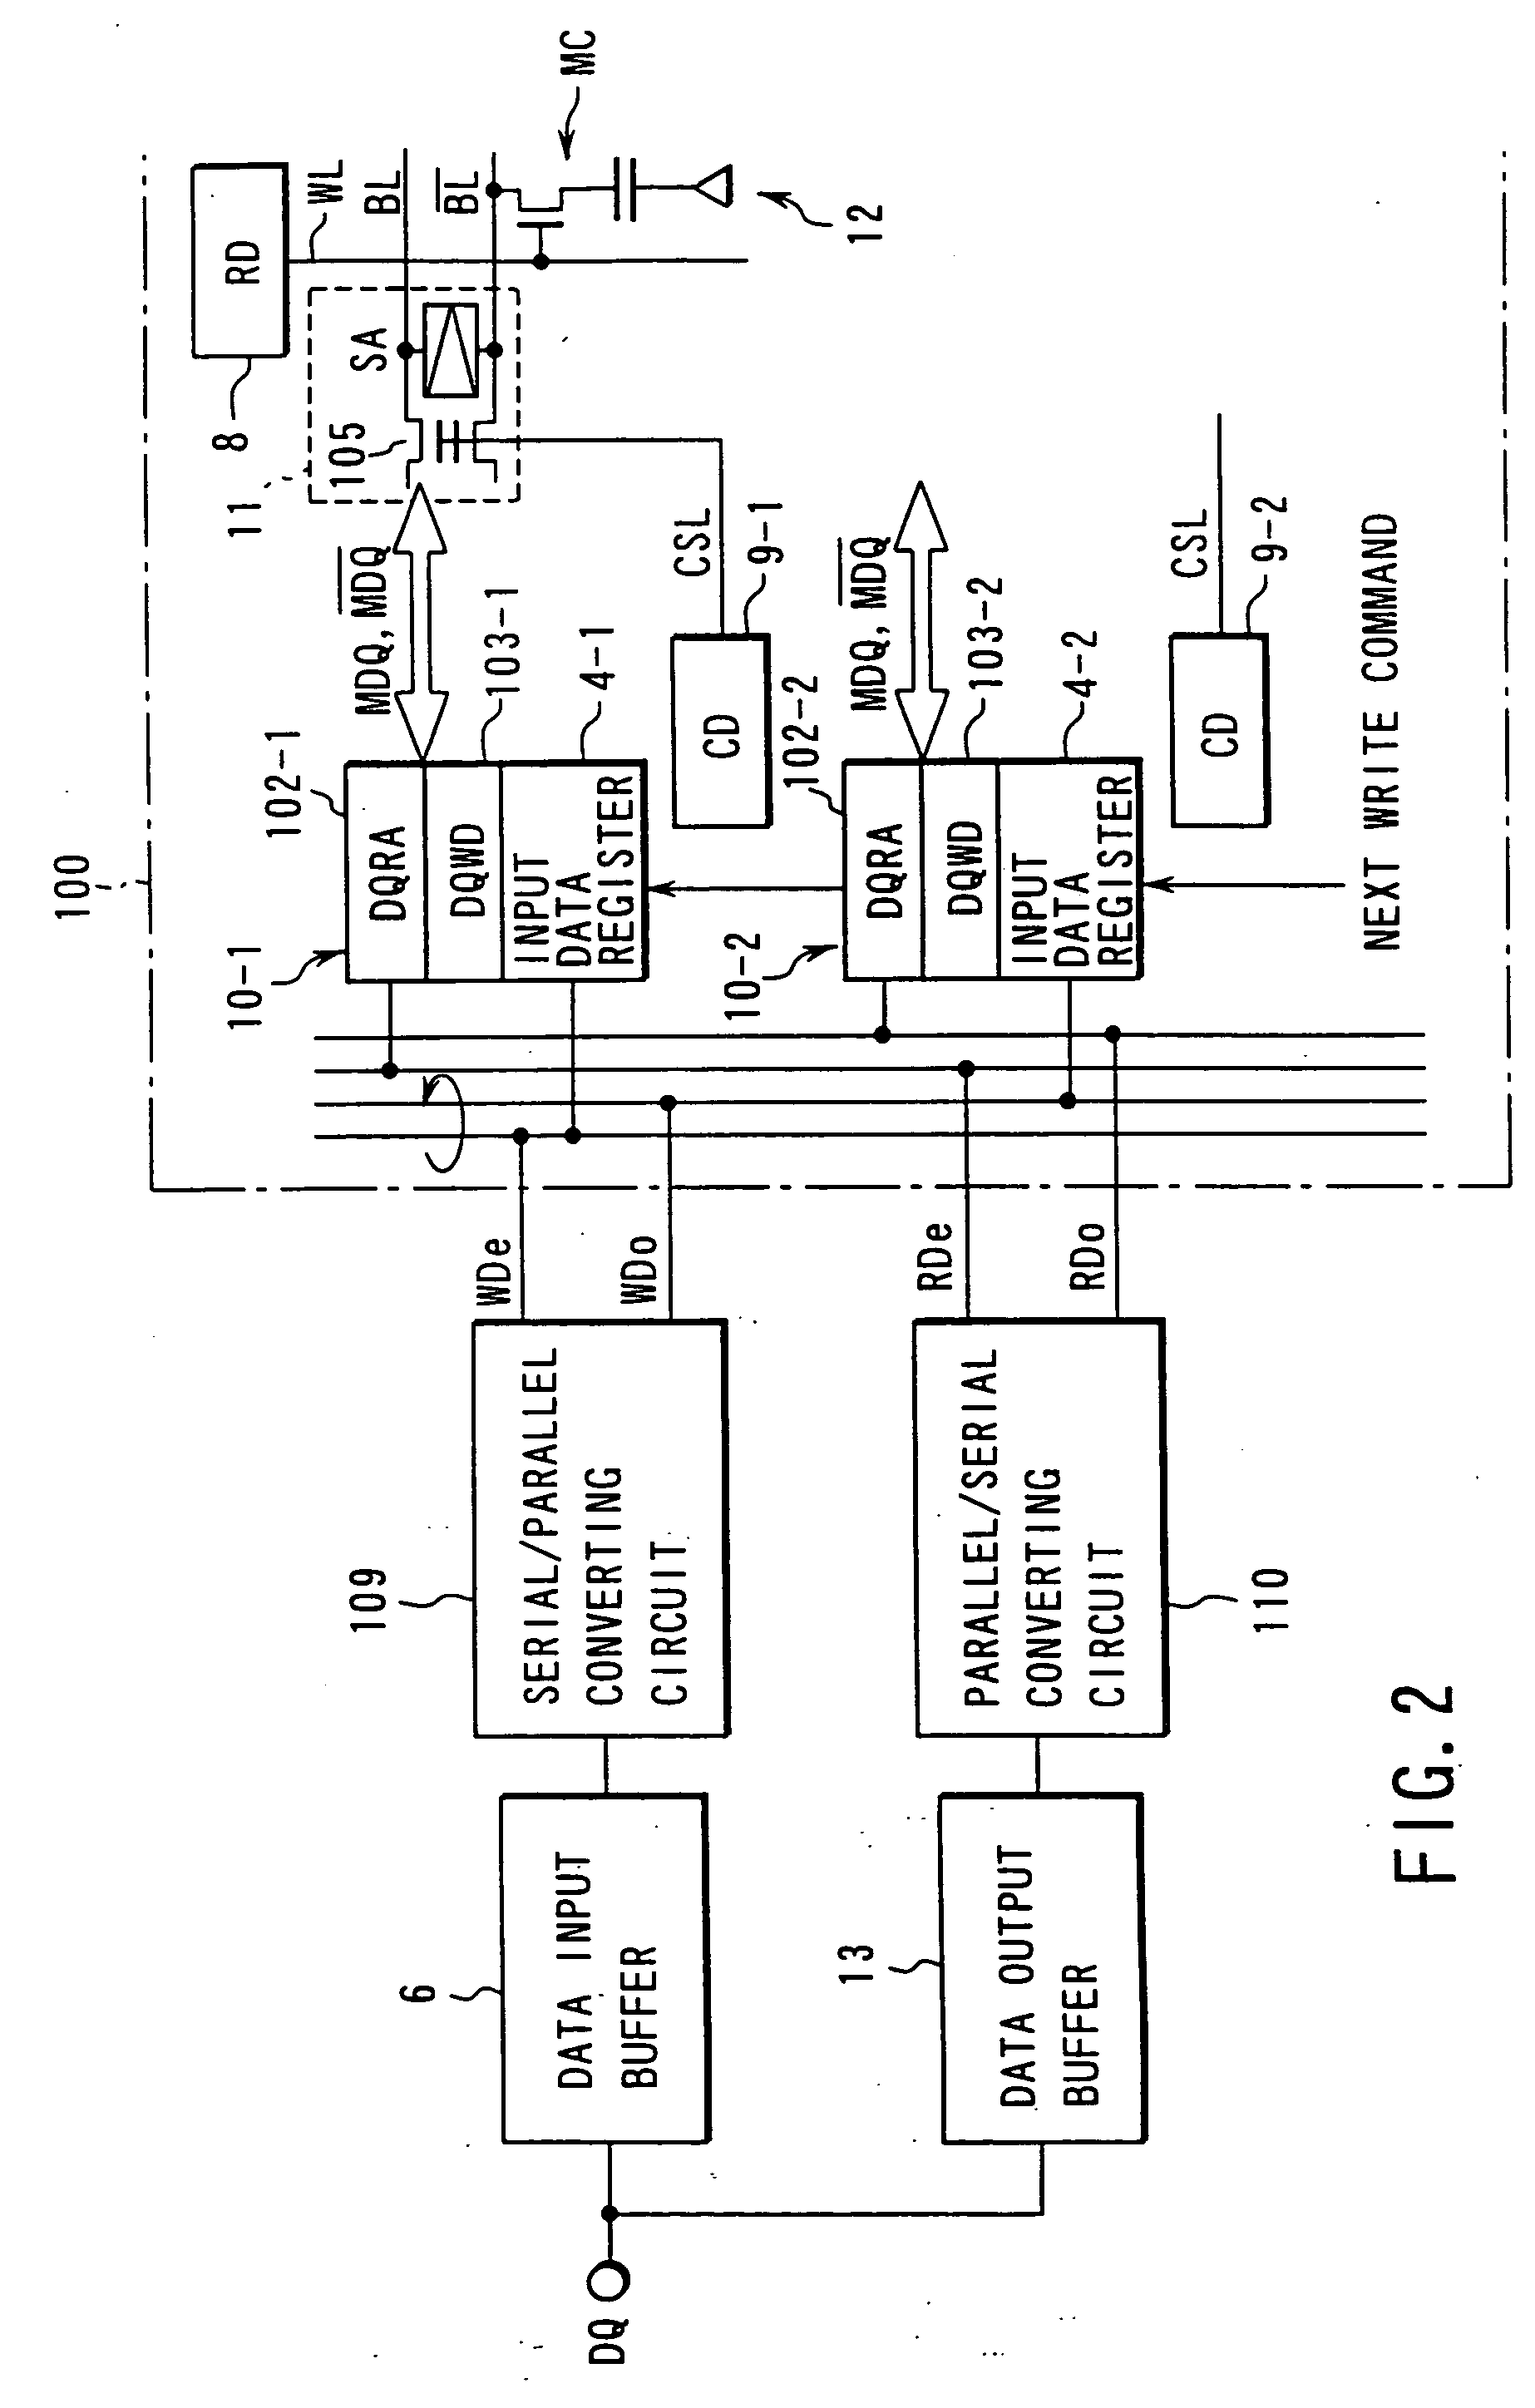 Method for writing data to a semiconductor memory comprising a peripheral circuit section and a memory core section including a memory cell